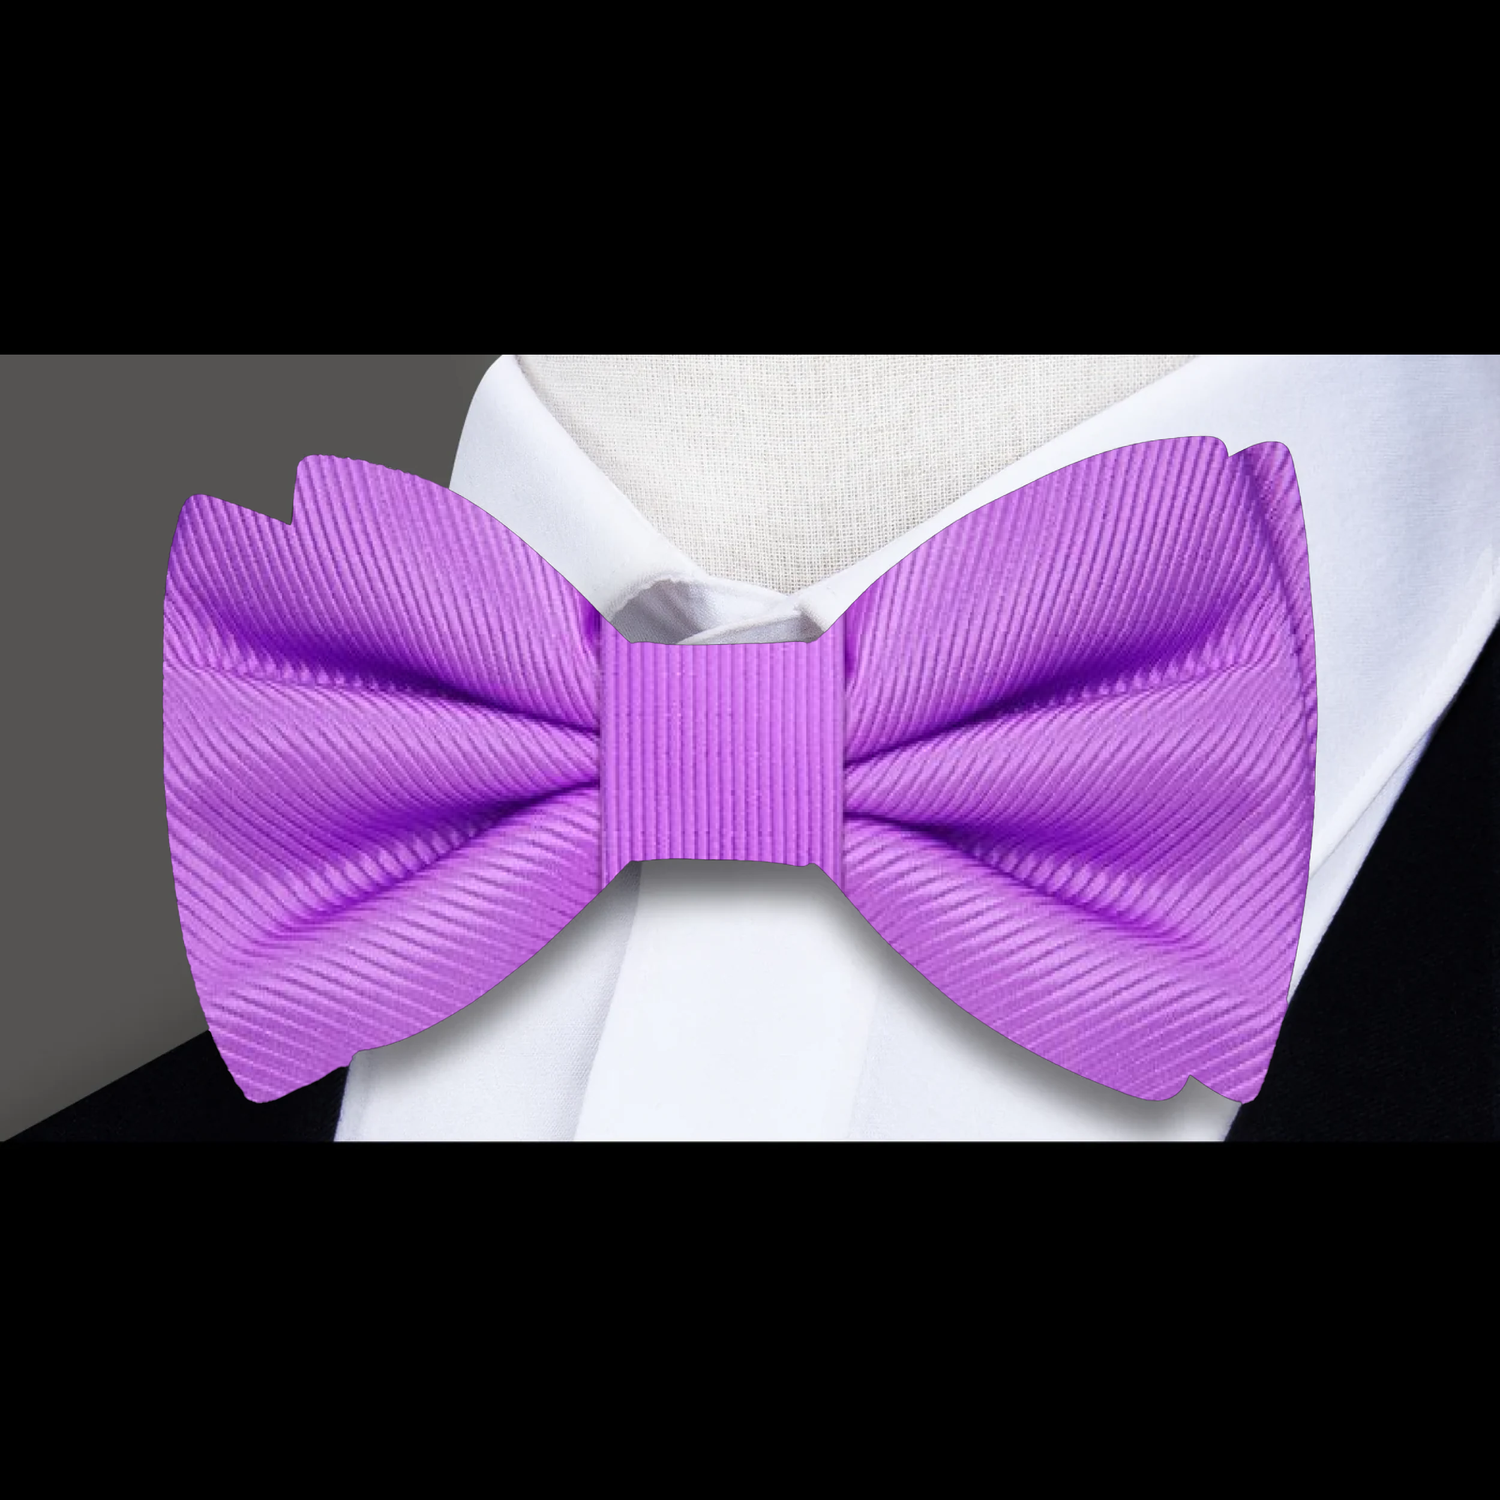 Light Purple Lined Bow Tie and Pocket Square